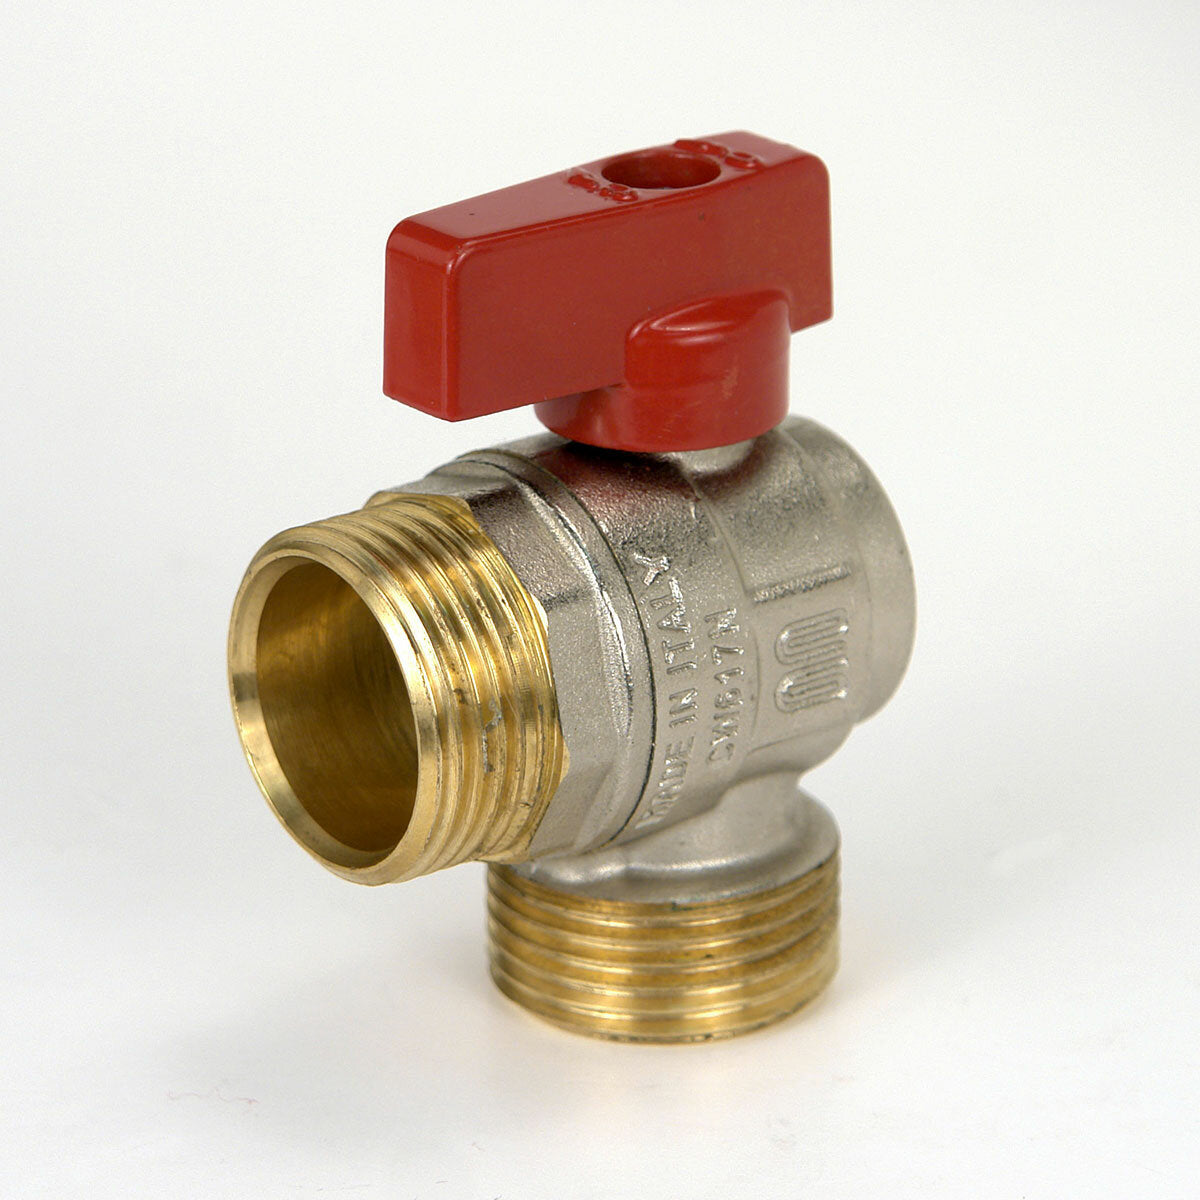 Enolgas Reverso ball valve with red lever multilayer connection 1" x 1"